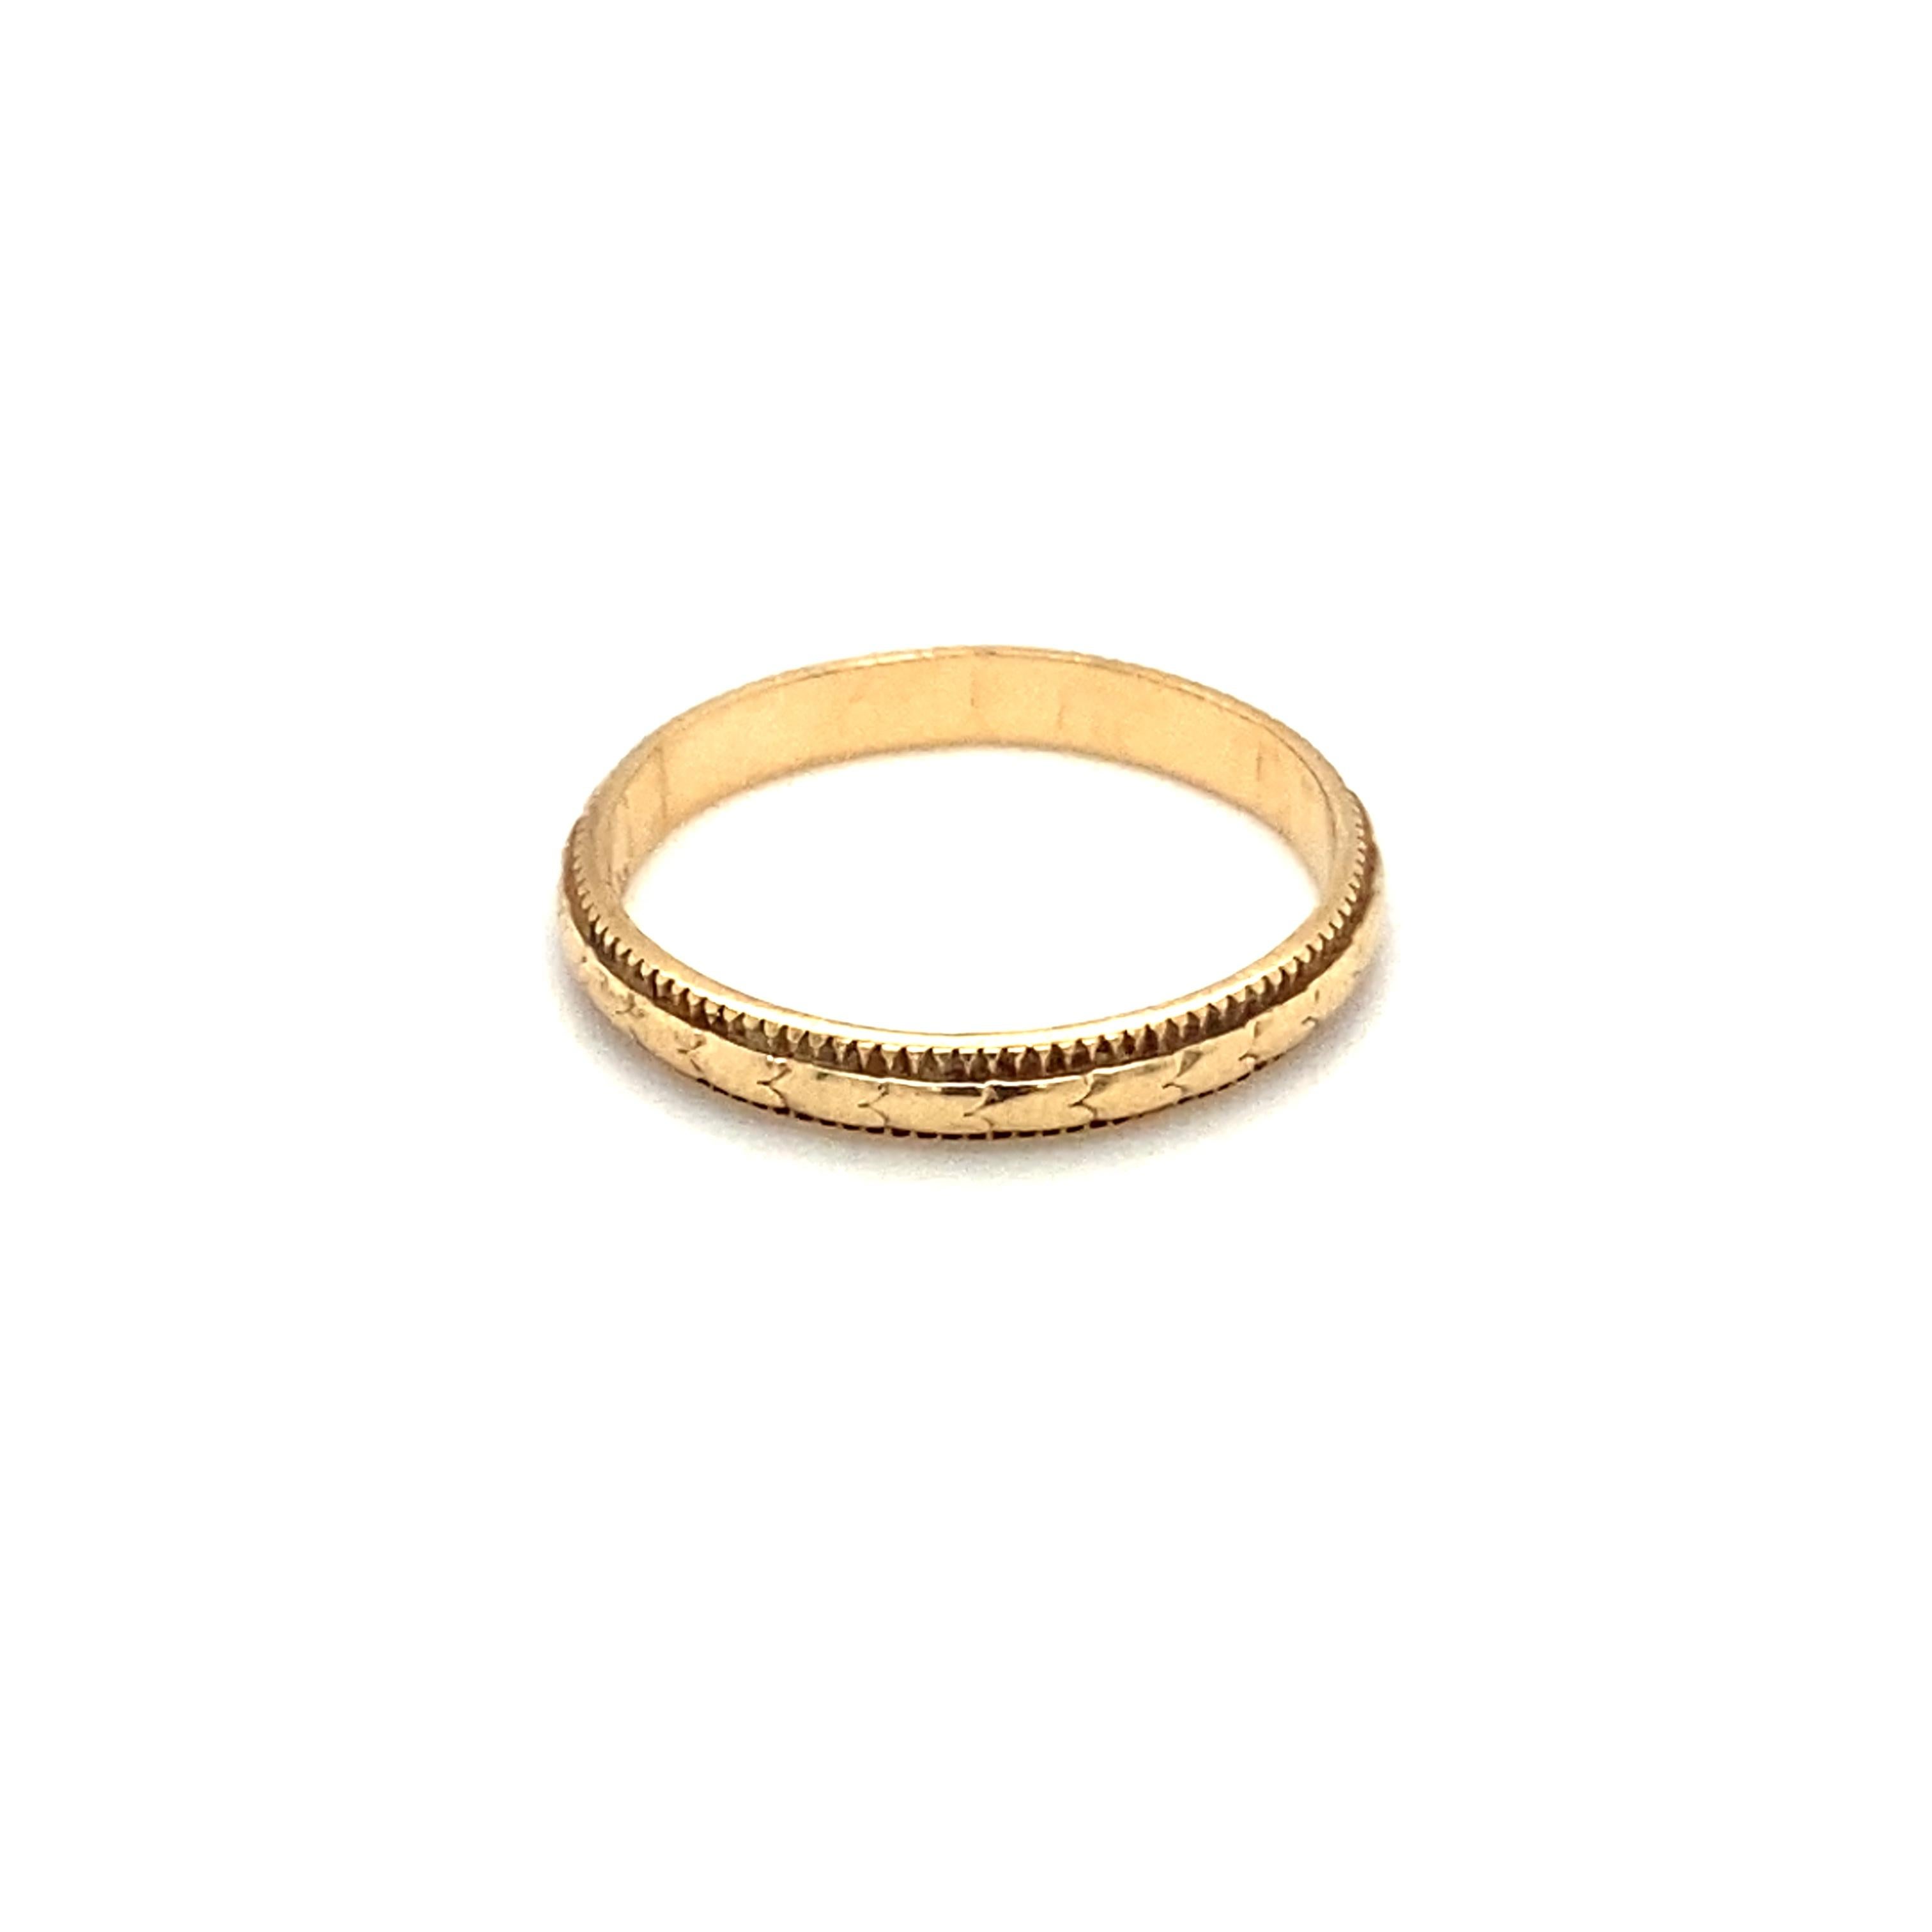 Women's or Men's Circa 1920s, Art Deco Etched Gold Band Ring in 14 Karat Yellow Gold